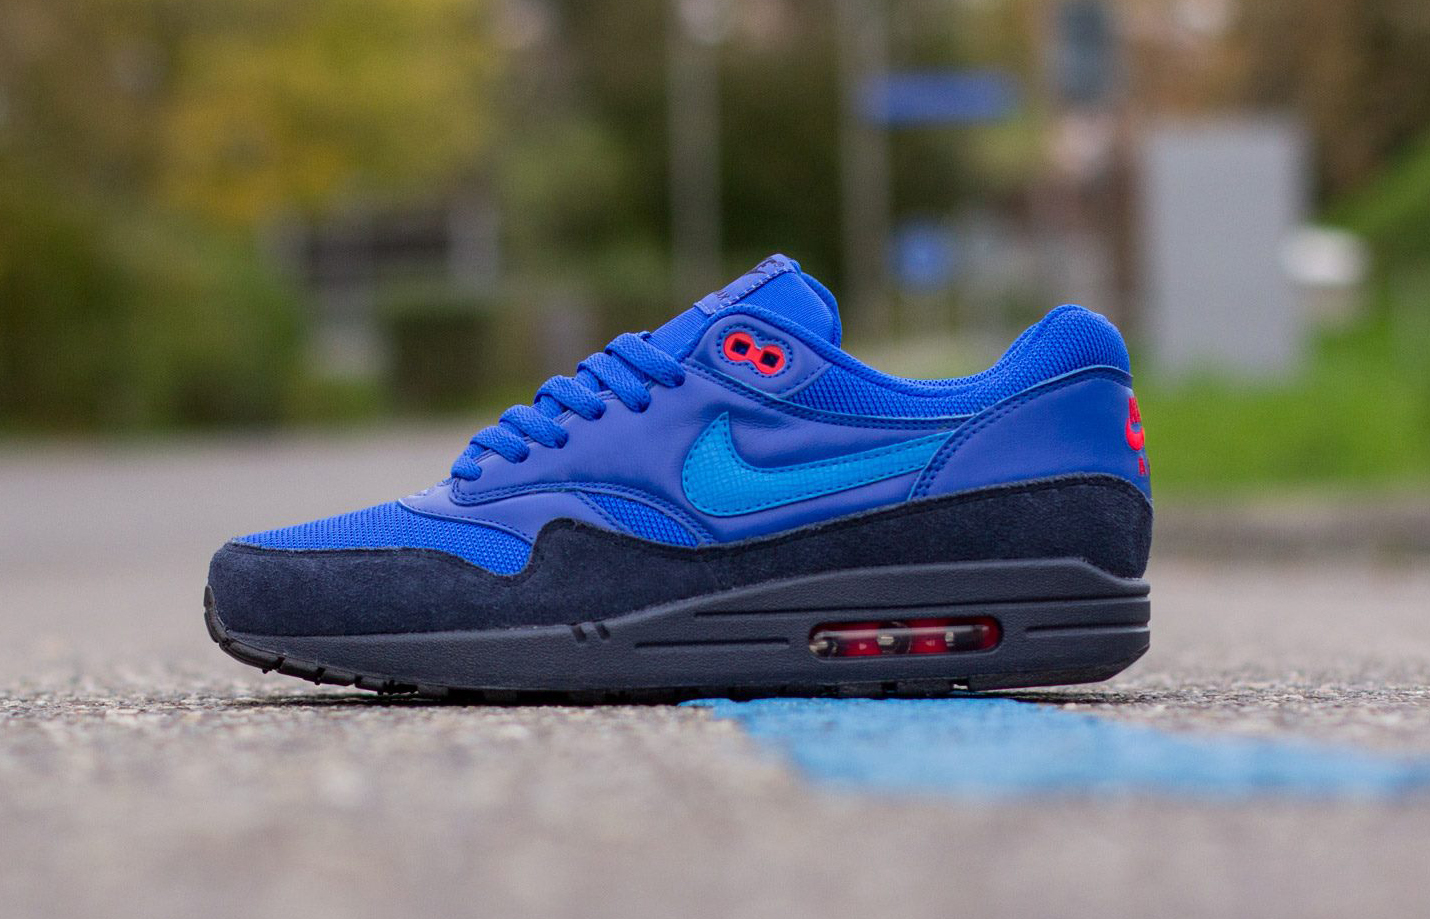 Great Barrier Reef louter Vruchtbaar Nike Air Max 1 FB "Photo Blue" | Sole Collector